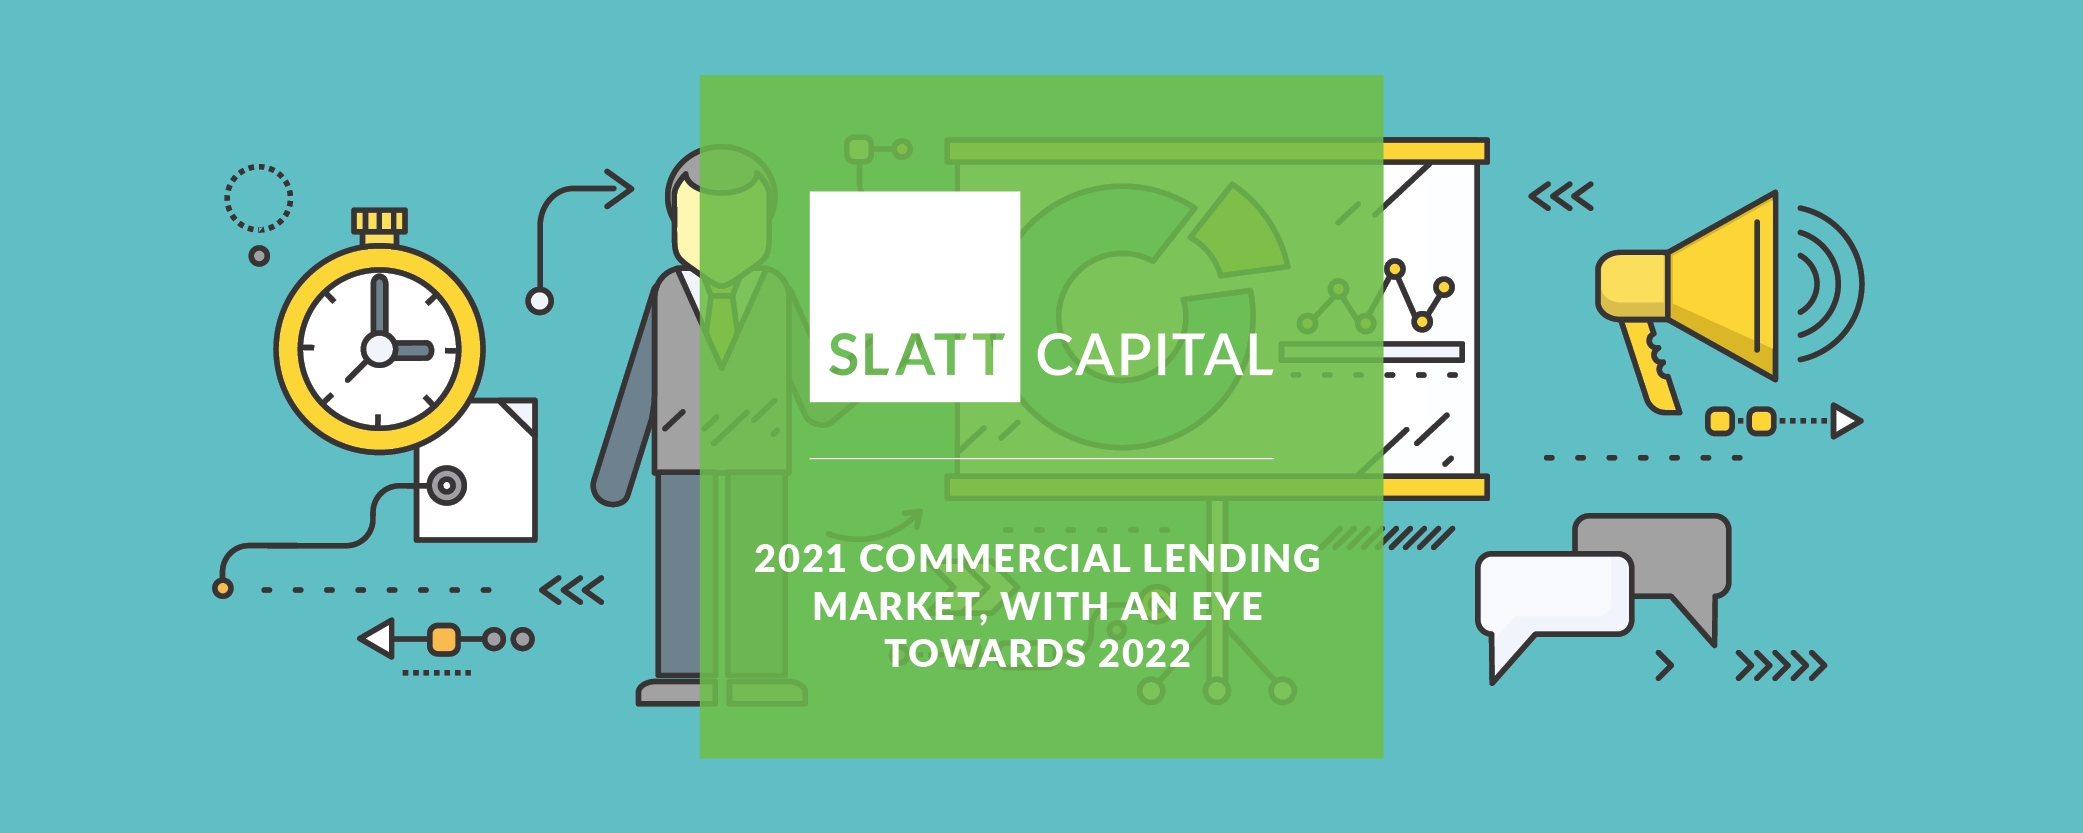 A look at the 2021 commercial lending market, with an eye towards 2022